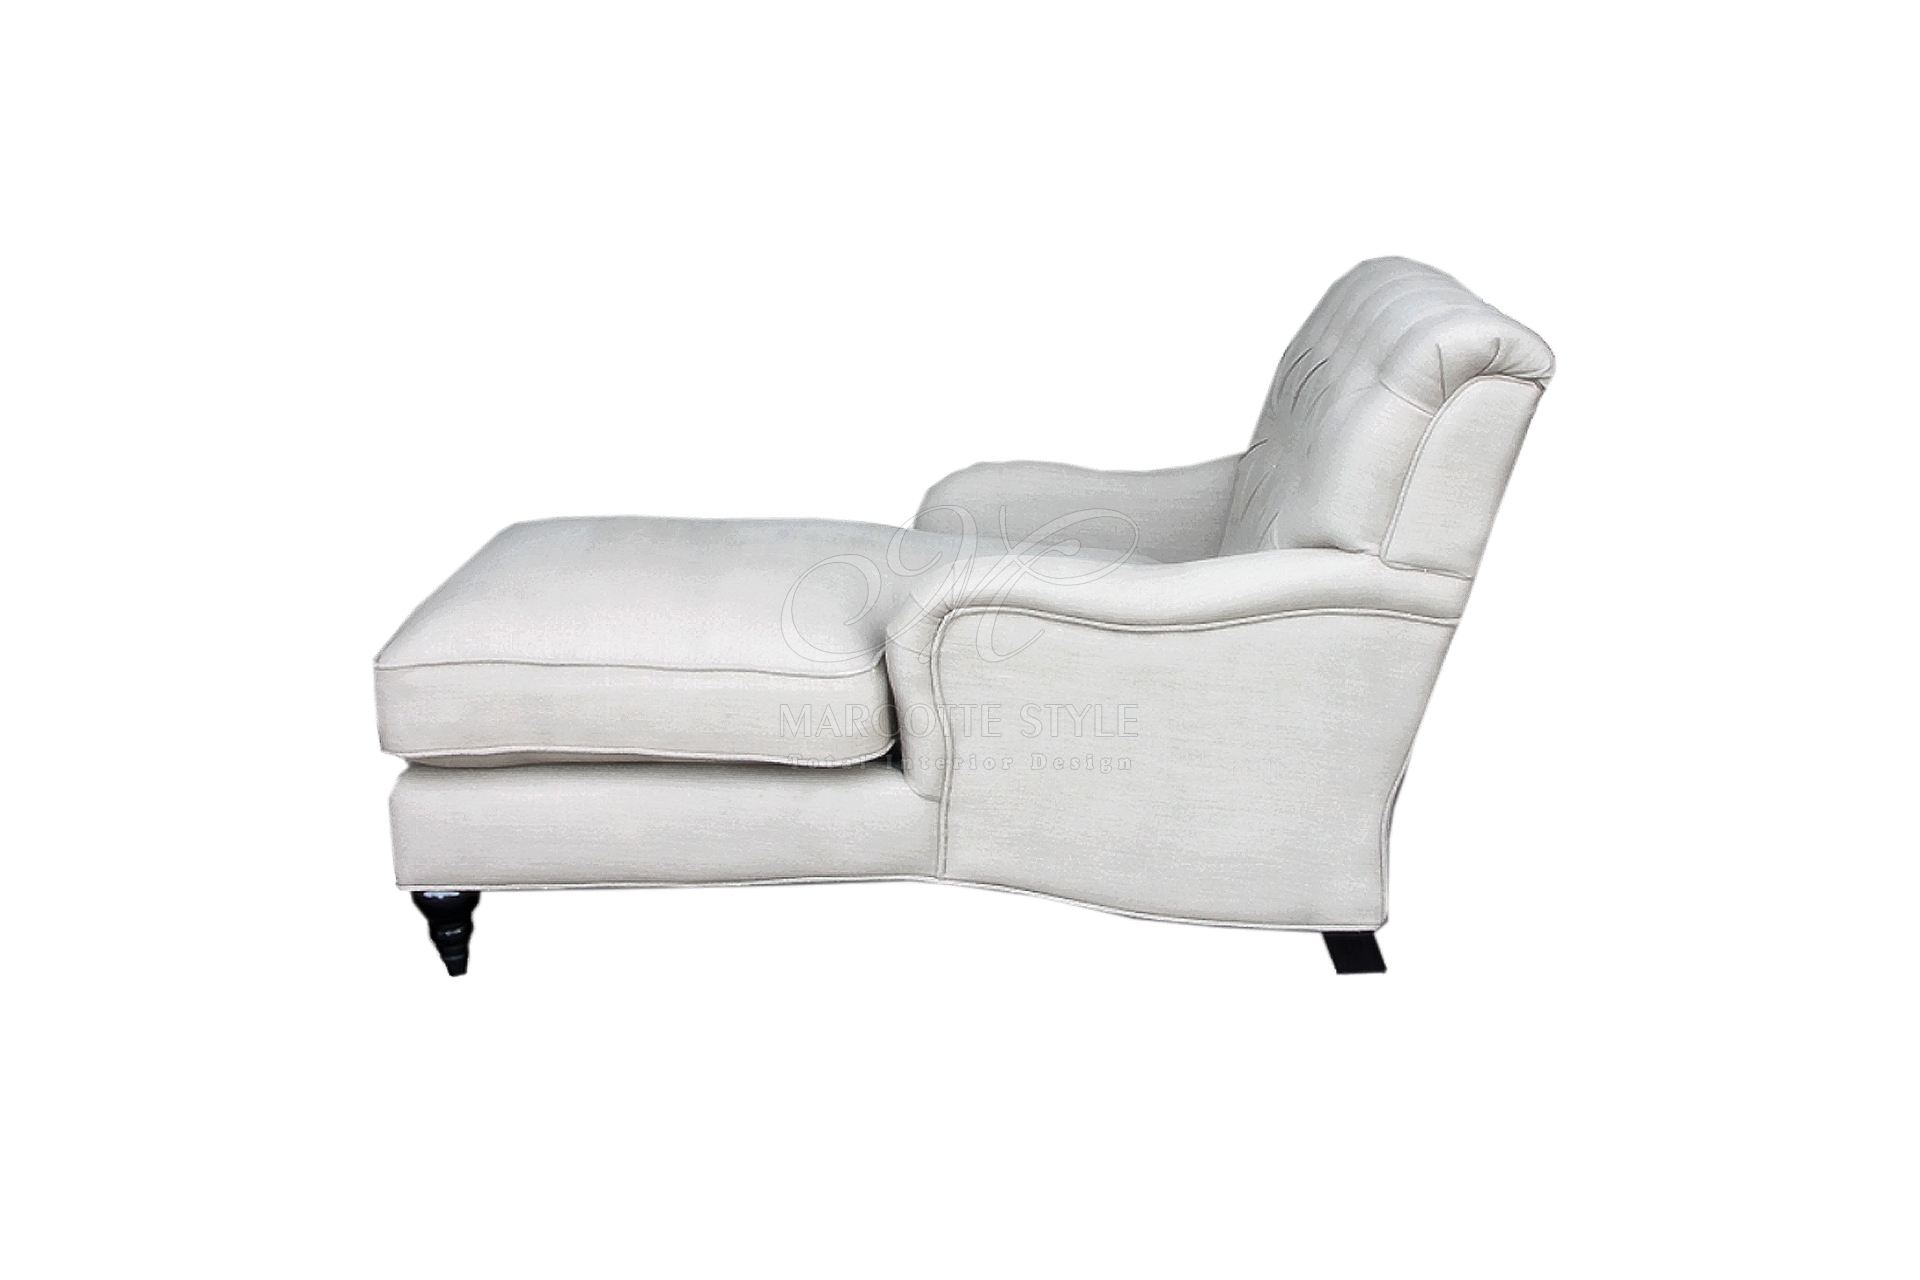 Chaise Henry van Marcottestyle